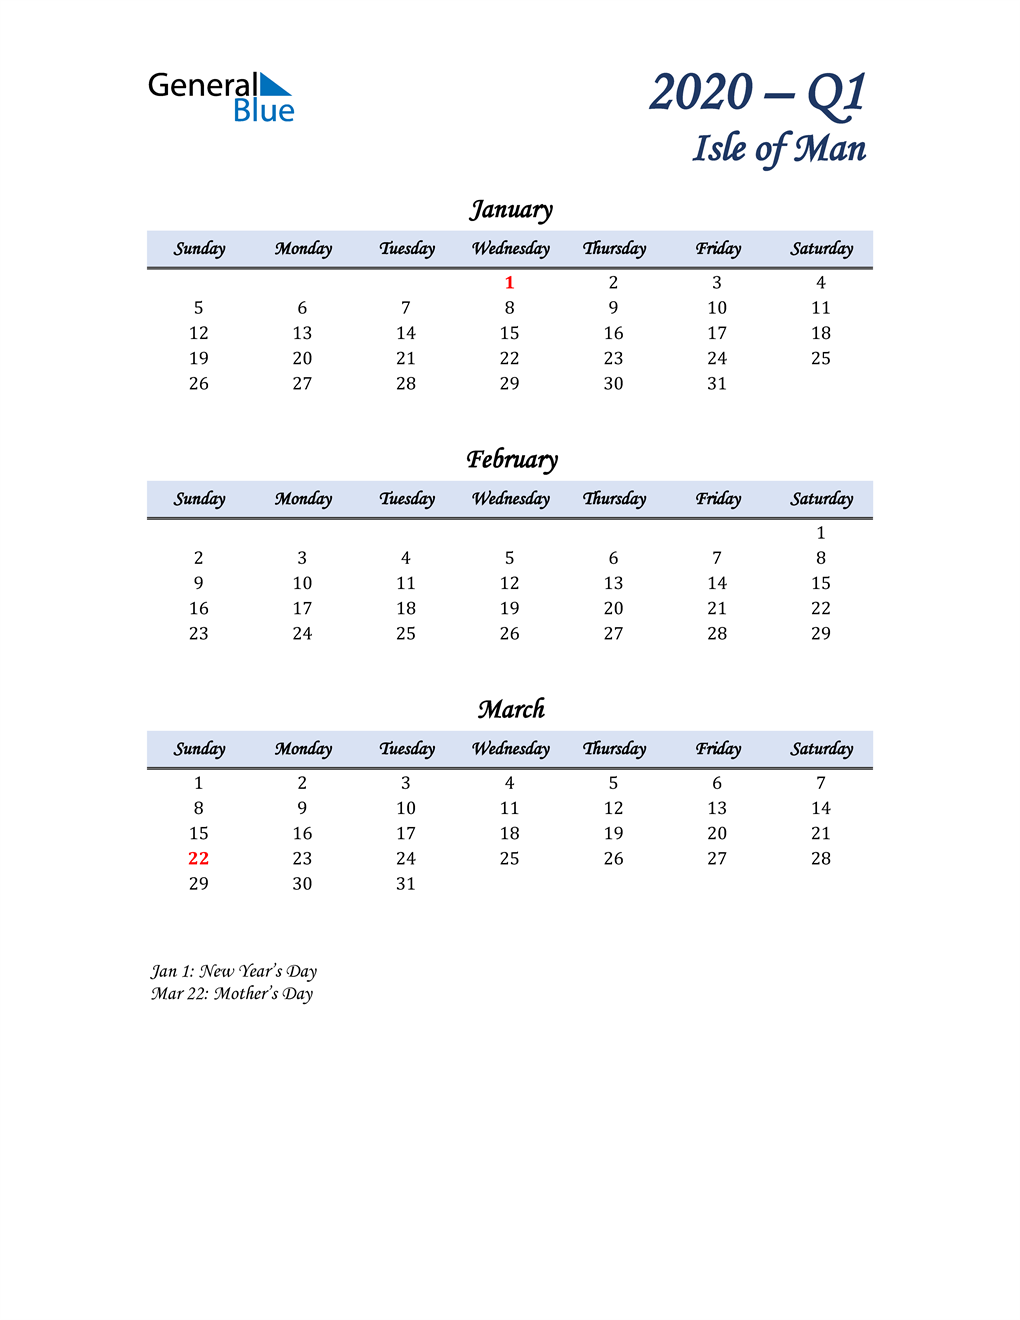  January, February, and March Calendar for Isle of Man